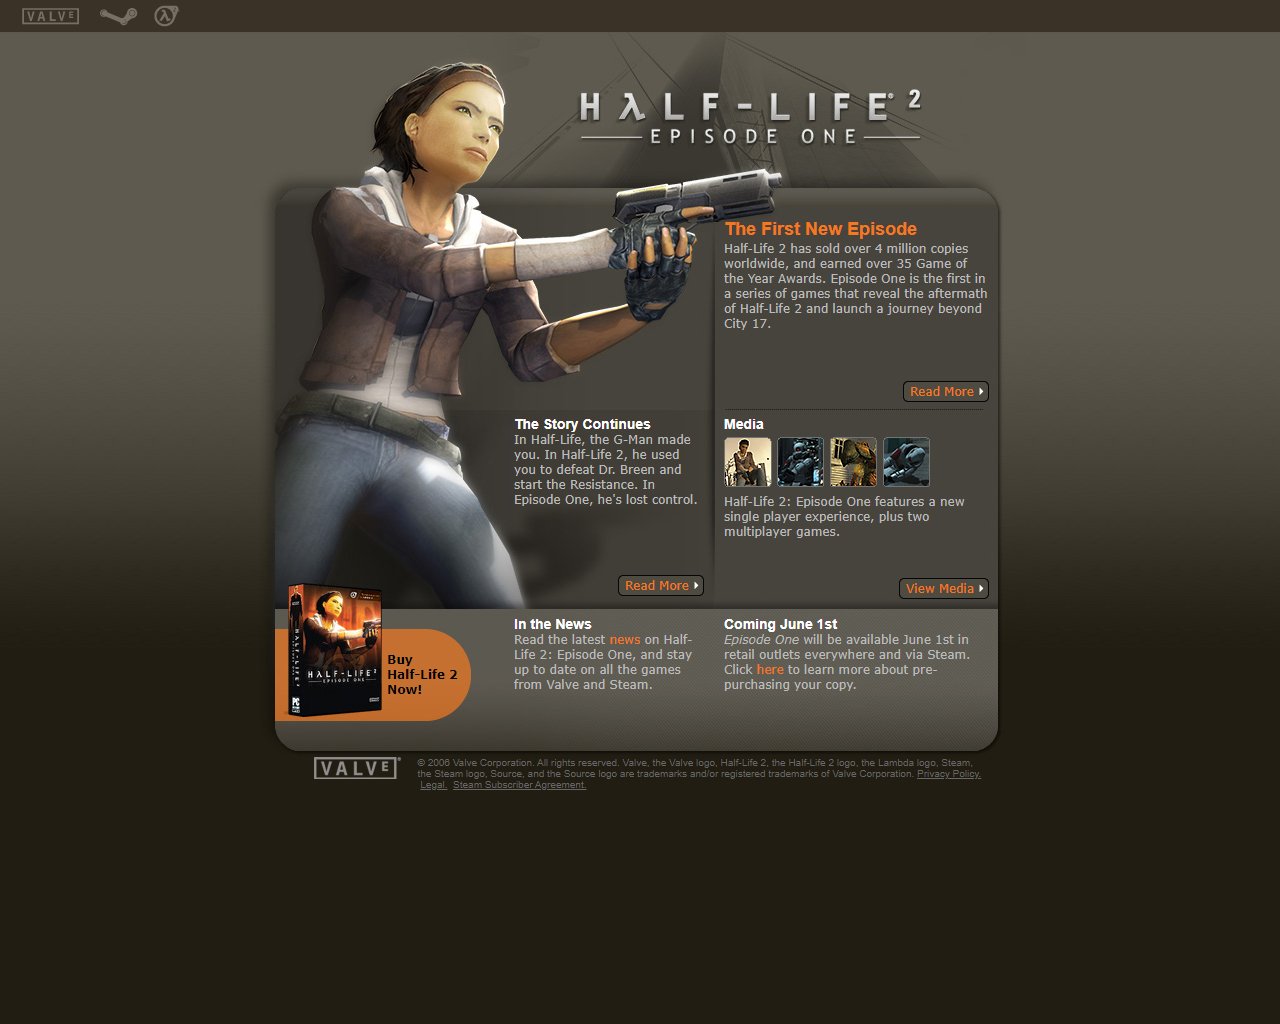 Half-Life 2: Episode One's website home page, circa April 2006. A gray and brown gradient background with a grid of sections featuring concept art of Half-Life 2 deuteragonist Alyx Vance, with links to a story section, a media page and an overview section, as well as links to buy the game, pre-purchasing information and latest news.